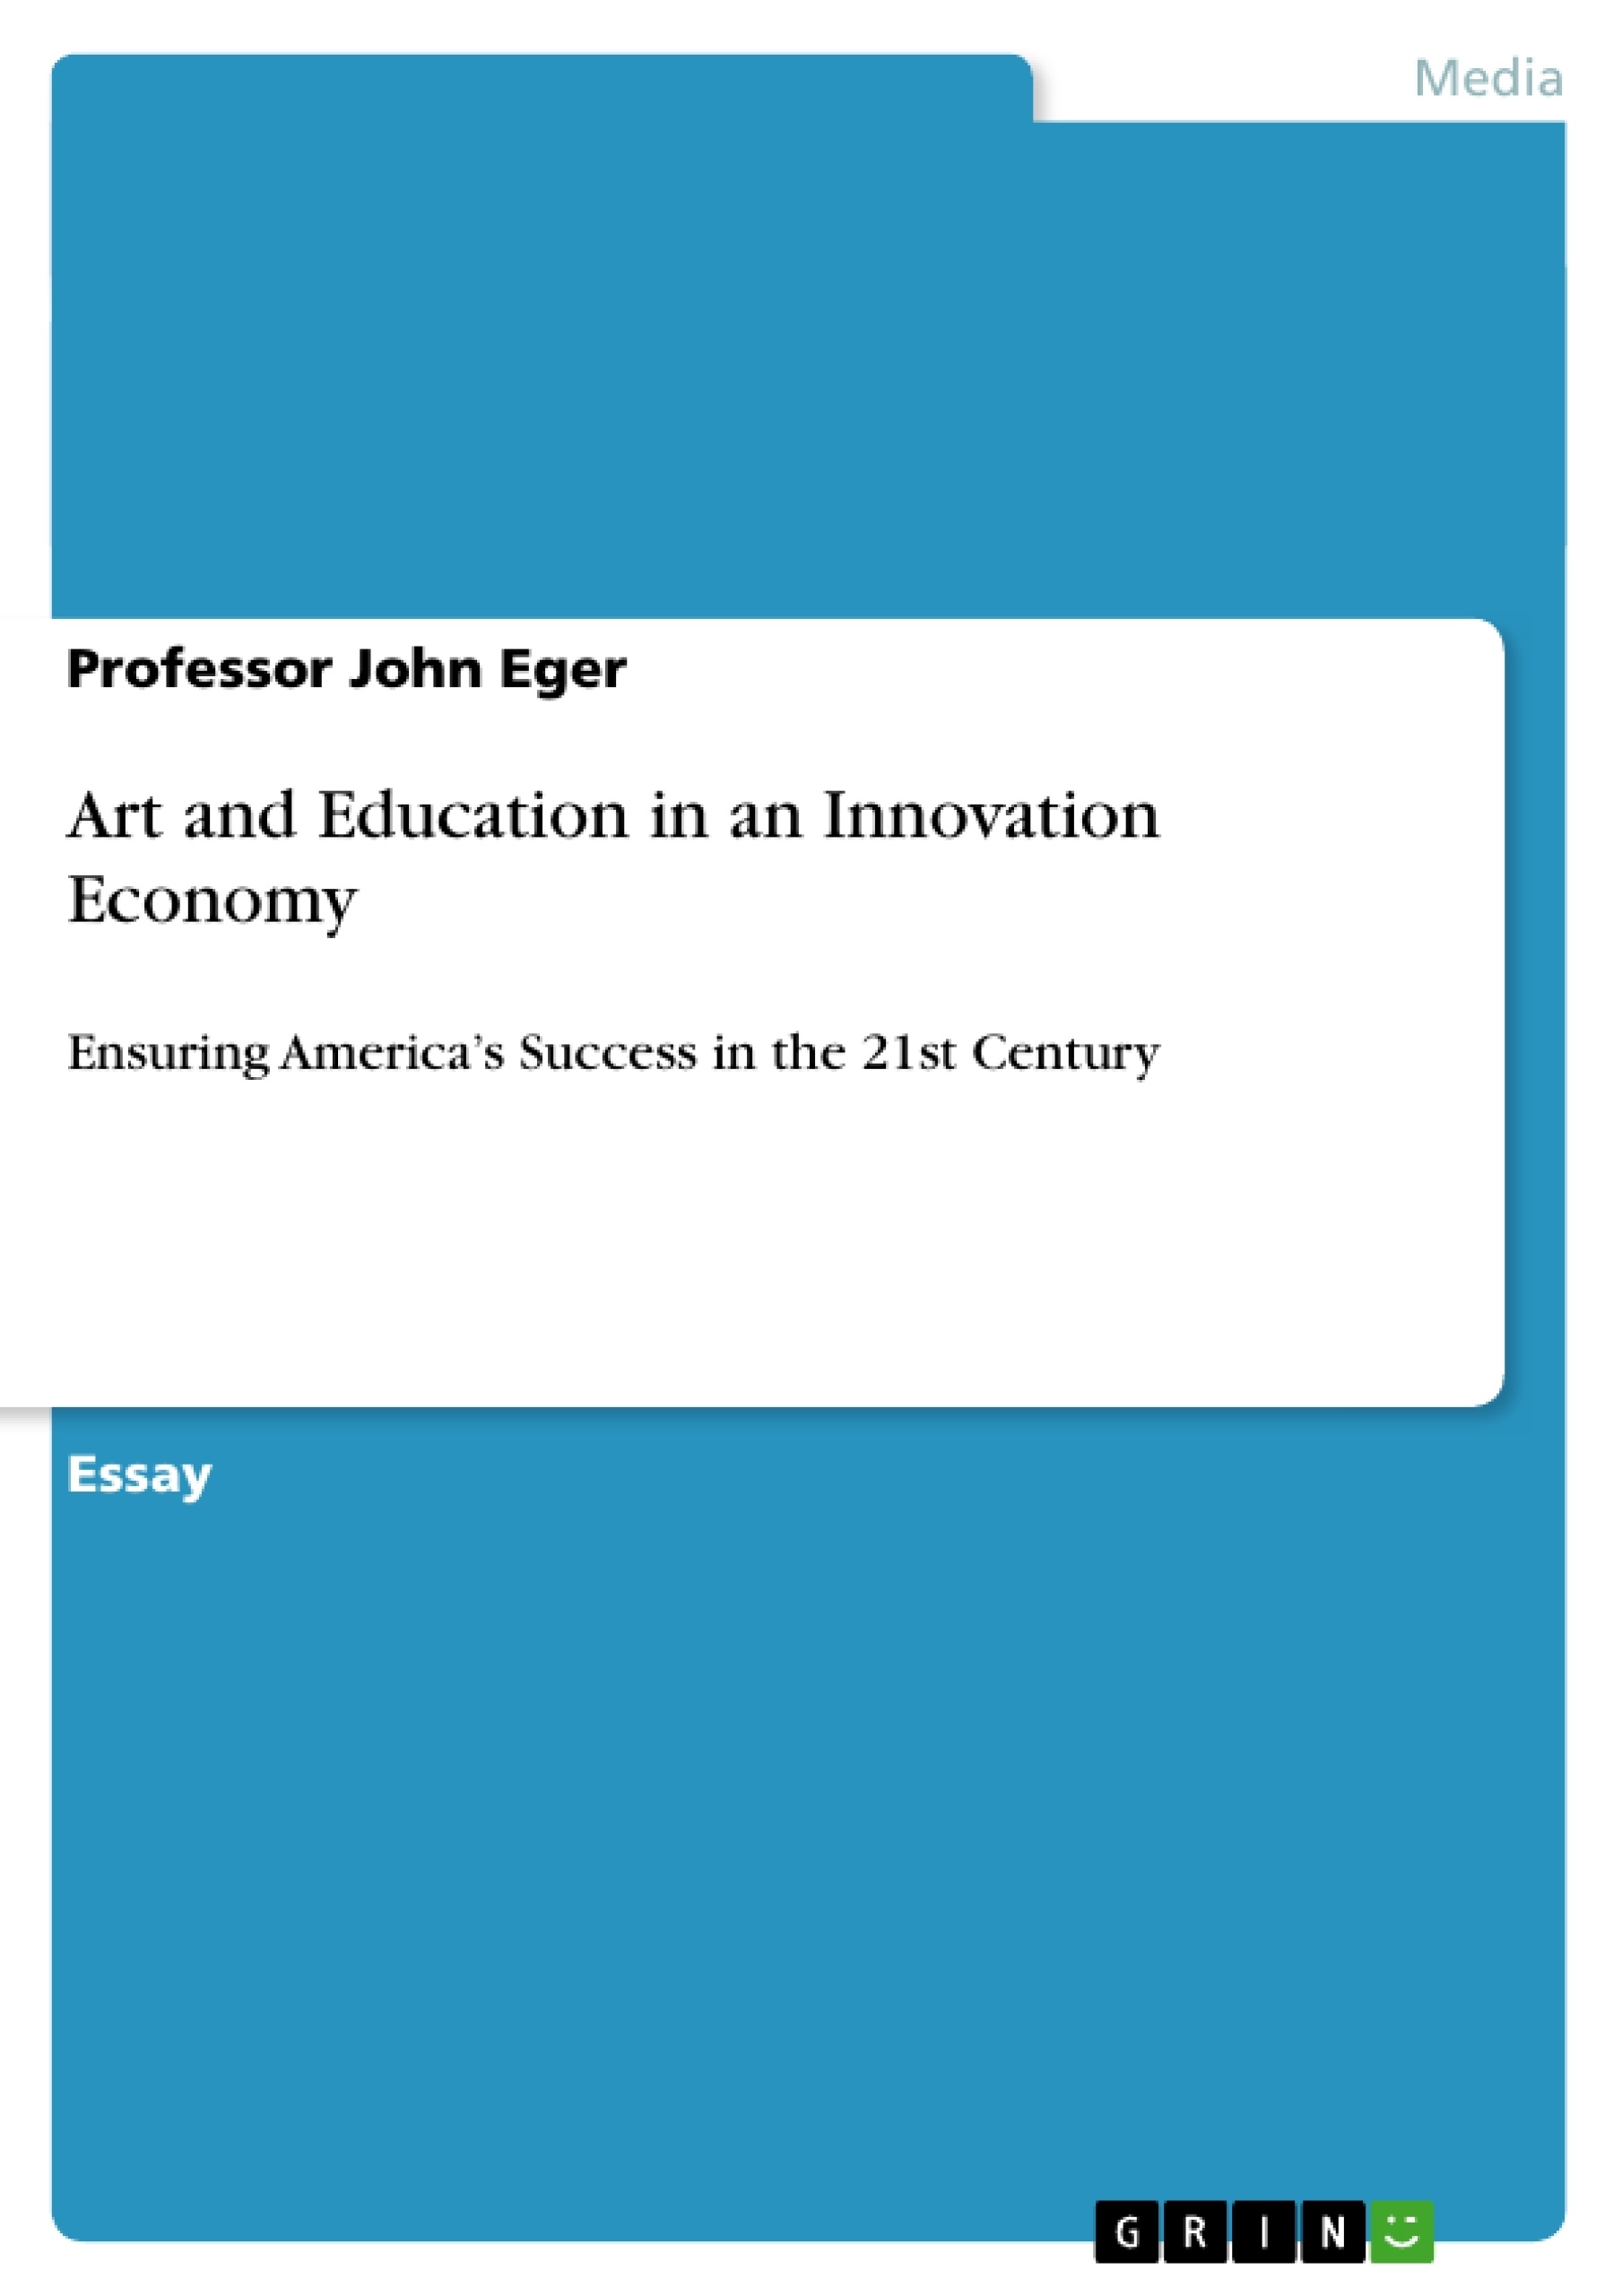 Title: Art and Education in an Innovation Economy